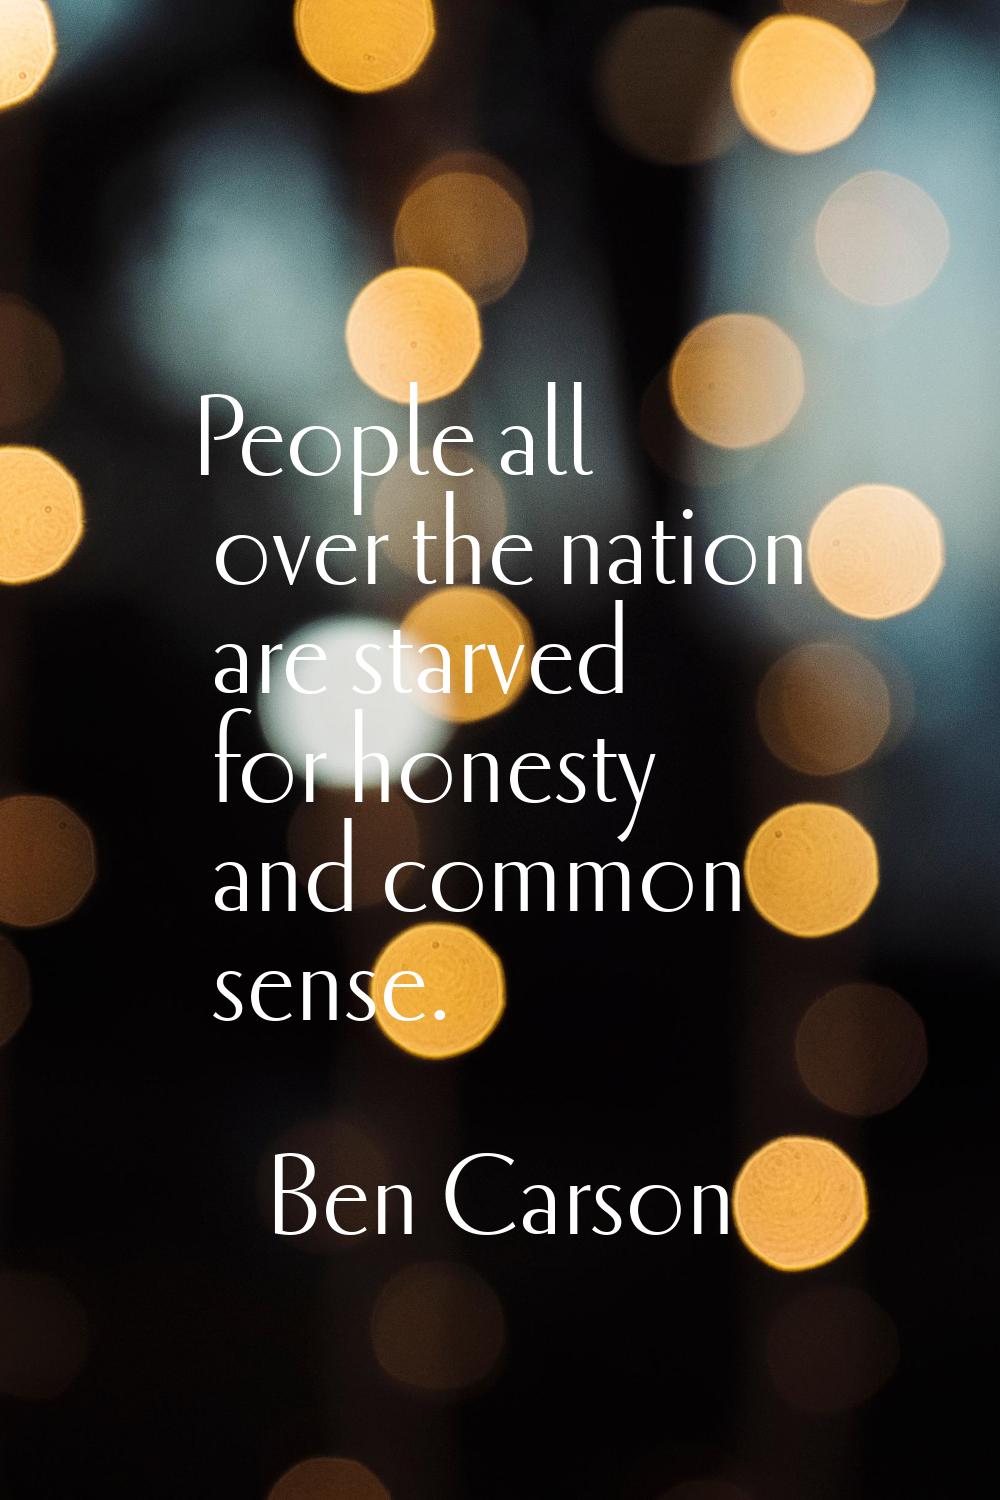 People all over the nation are starved for honesty and common sense.